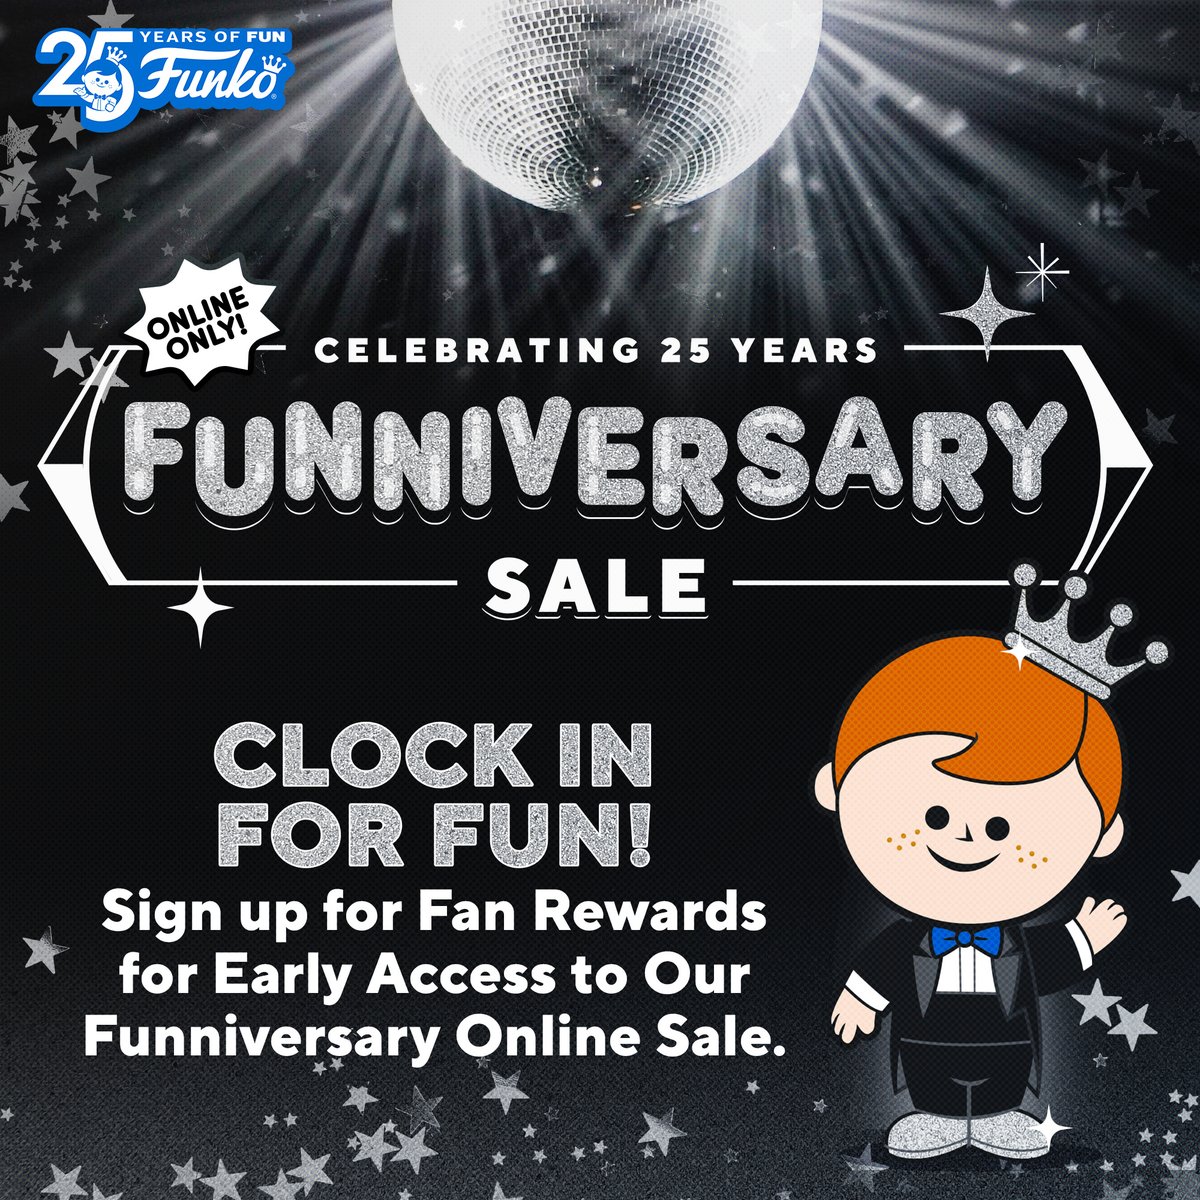 FUN-omenal sale coming soon! Sign up for our Loyalty Program for early access to a 25th Funniversary site-wide sale for both Loungefly & Funko. Sign up here: bit.ly/3LsG2vn #Funniversary #FunkoSale #Loungefly